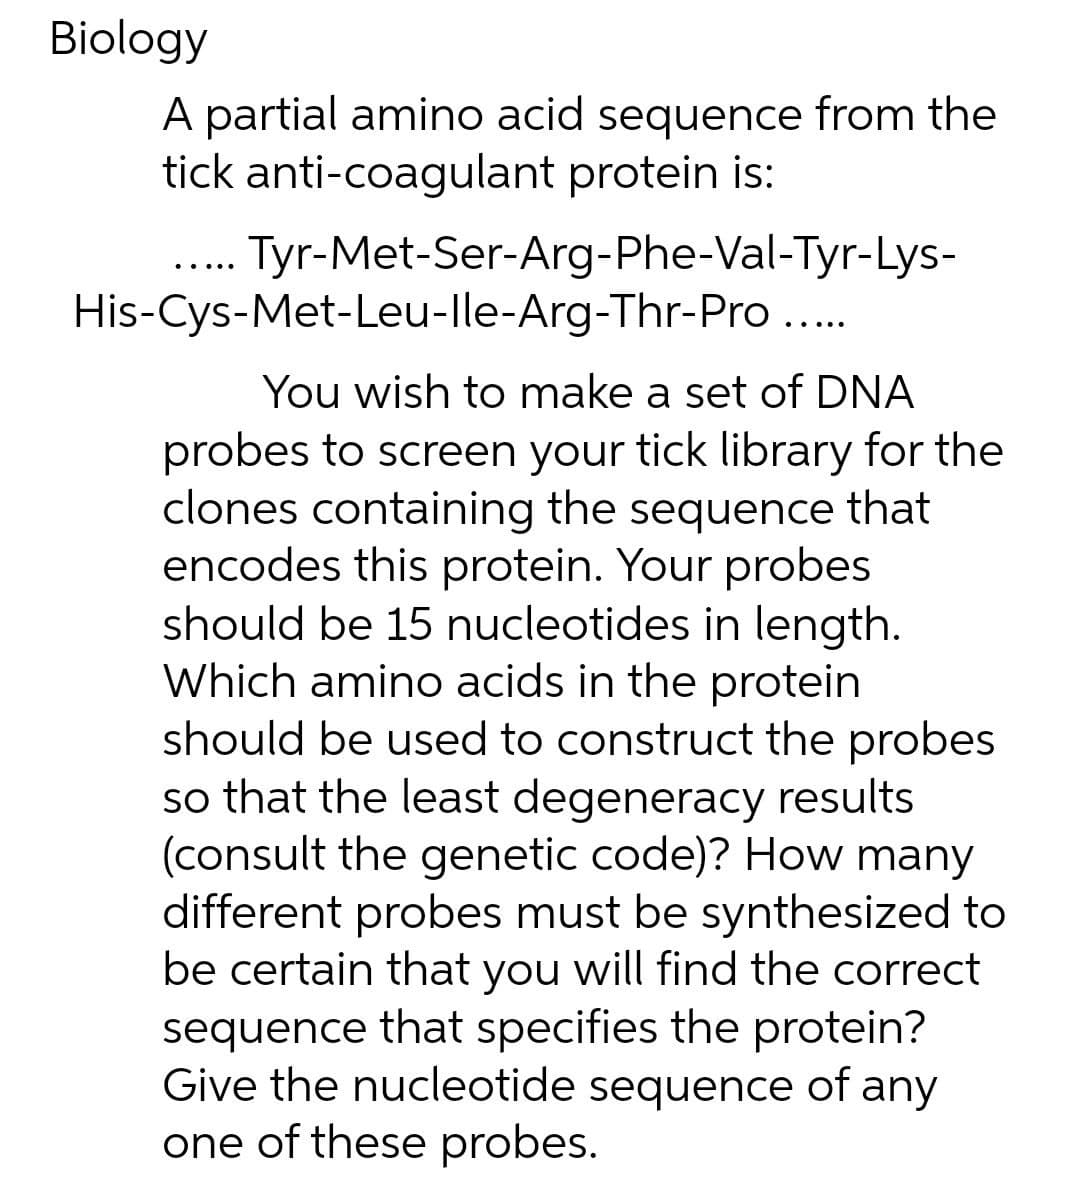 Biology
A partial amino acid sequence from the
tick anti-coagulant protein is:
Tyr-Met-Ser-Arg-Phe-Val-Tyr-Lys-
His-Cys-Met-Leu-lle-Arg-Thr-Pro..
....
You wish to make a set of DNA
probes to screen your tick library for the
clones containing the sequence that
encodes this protein. Your probes
should be 15 nucleotides in length.
Which amino acids in the protein
should be used to construct the probes
so that the least degeneracy results
(consult the genetic code)? How many
different probes must be synthesized to
be certain that you will find the correct
sequence that specifies the protein?
Give the nucleotide sequence of any
one of these probes.
